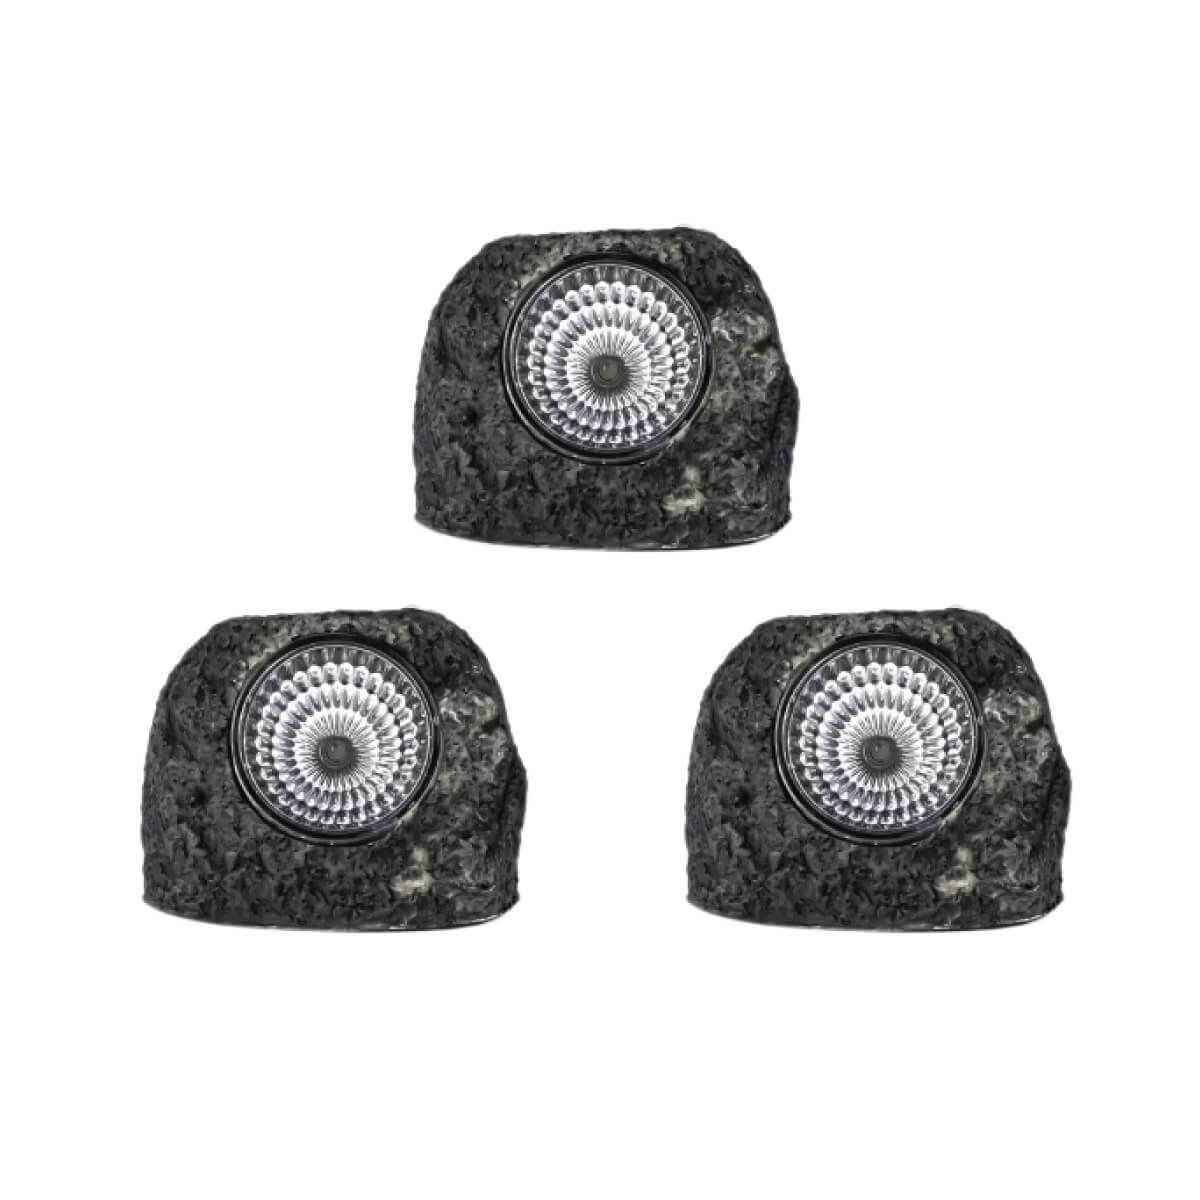 View Pack of 3 LED Solar Small Rock Decorative Lights information